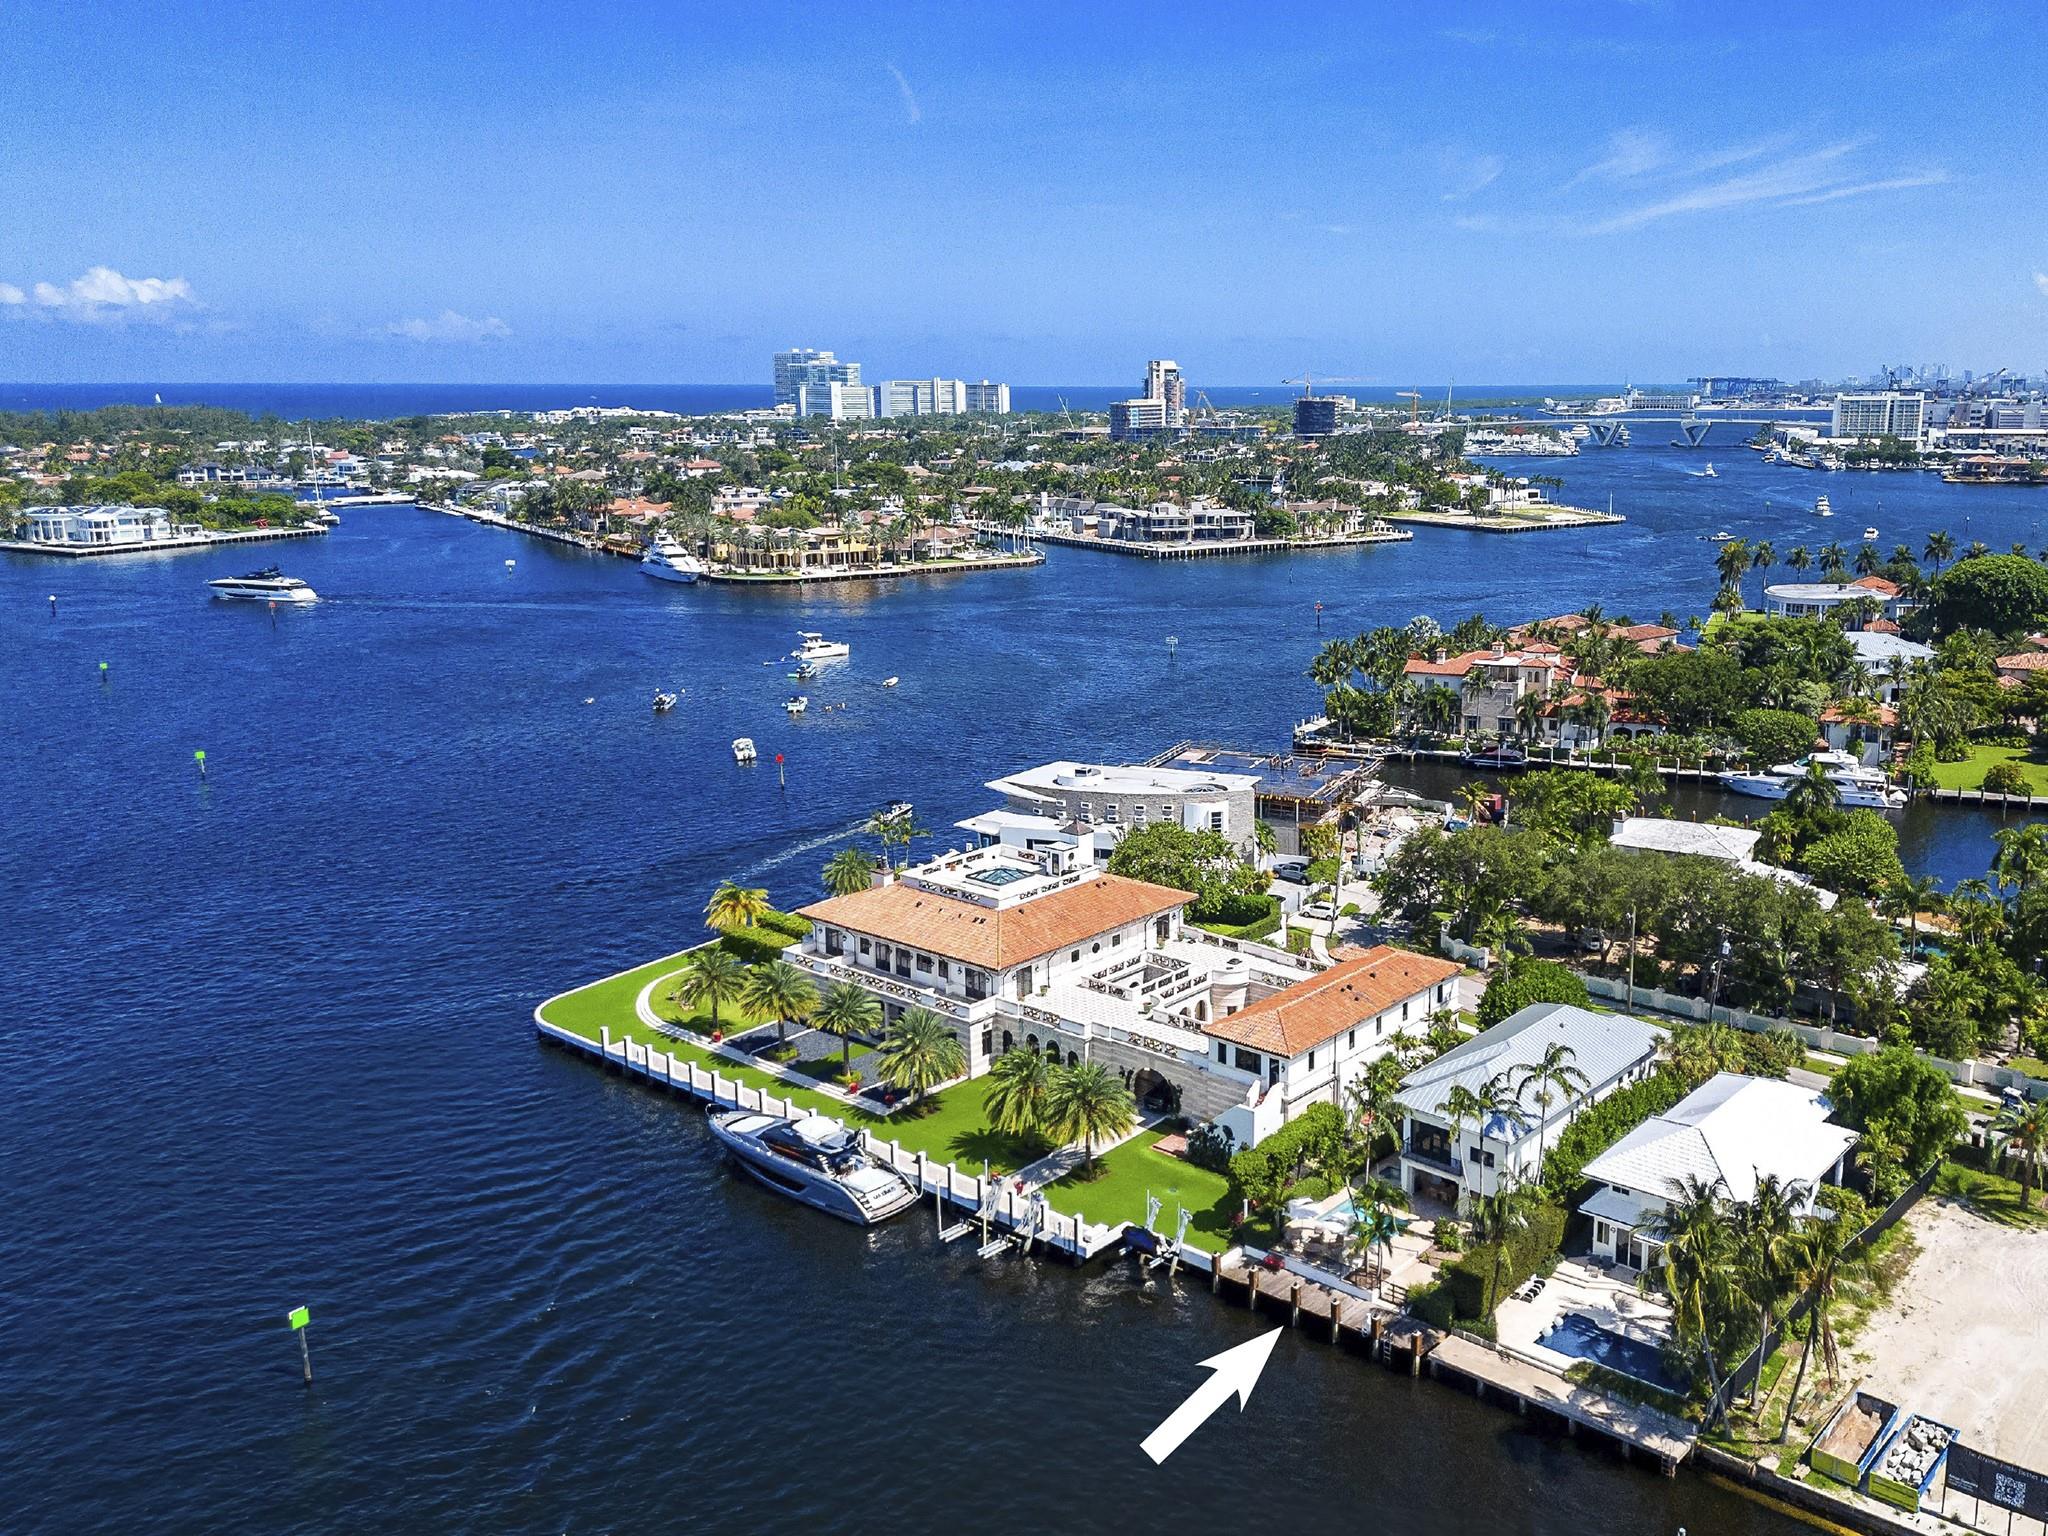 This stunning property presents wide water views where the New River meets the Intracoastal Waterway. Choose to live the ultimate South Florida lifestyle in this meticulously designed and perfectly maintained waterfront home nestled on one of the finest streets in the historic Rio Vista waterfront neighborhood. The home has numerous custom builtins, bookshelves and hardwood floors throughout. The upstairs primary bedroom suite has two baths and a separate sitting room with beautiful views of the New River. Experience outdoor living and entertaining on the covered loggia with outdoor grill. Exterior walls were re-stuccoed and new A/C units added recently, along with new awnings and garage doors, plus impact windows and alarm system. A new metal roof was added in 2023.